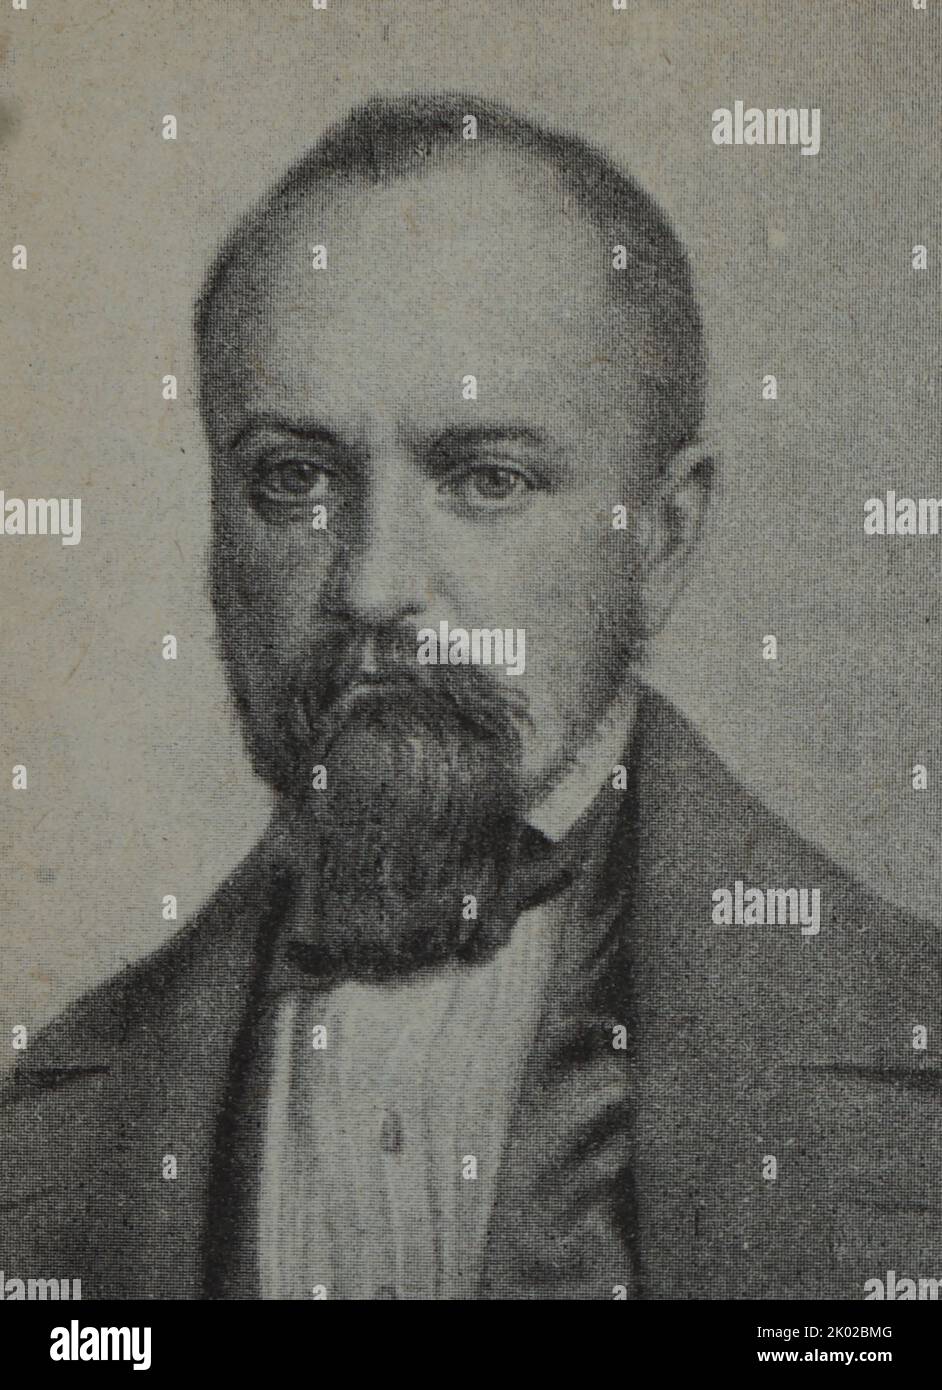 Alexander Ivanovich Herzen (1812 - 1870) Russian writer and thinker known as the "father of Russian socialism" Stock Photo